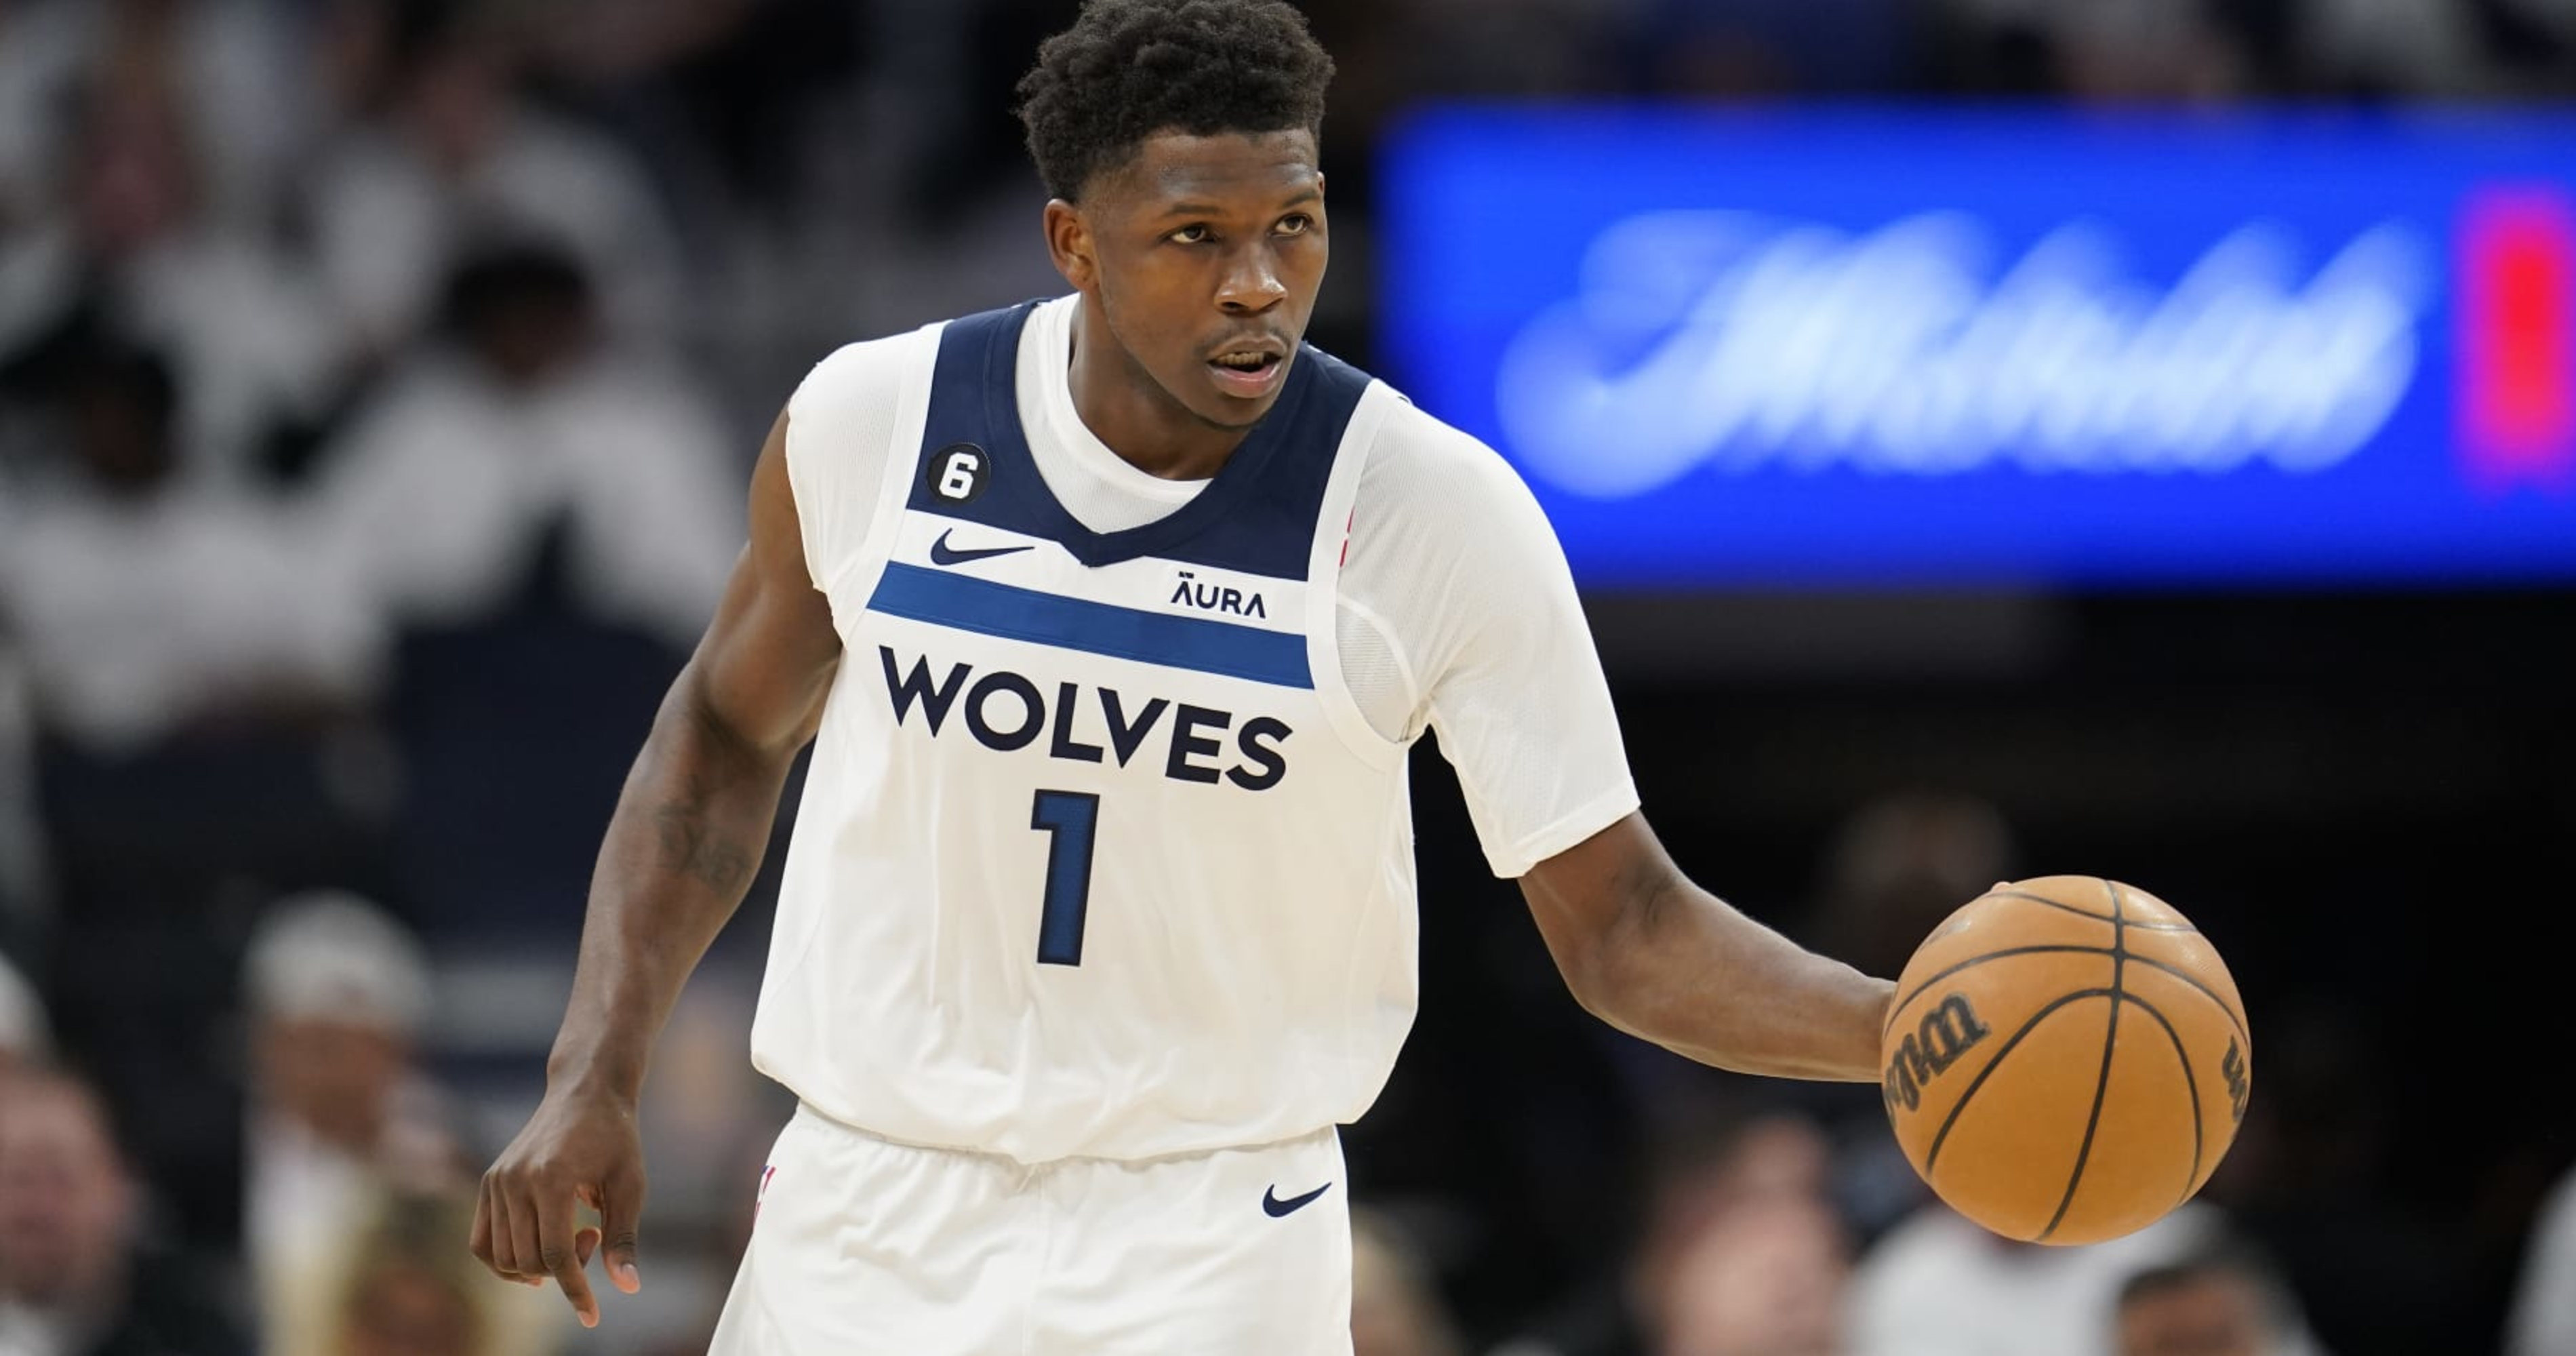 TWolves' Anthony Edwards I'll Be in Conversation as NBA's Best Player